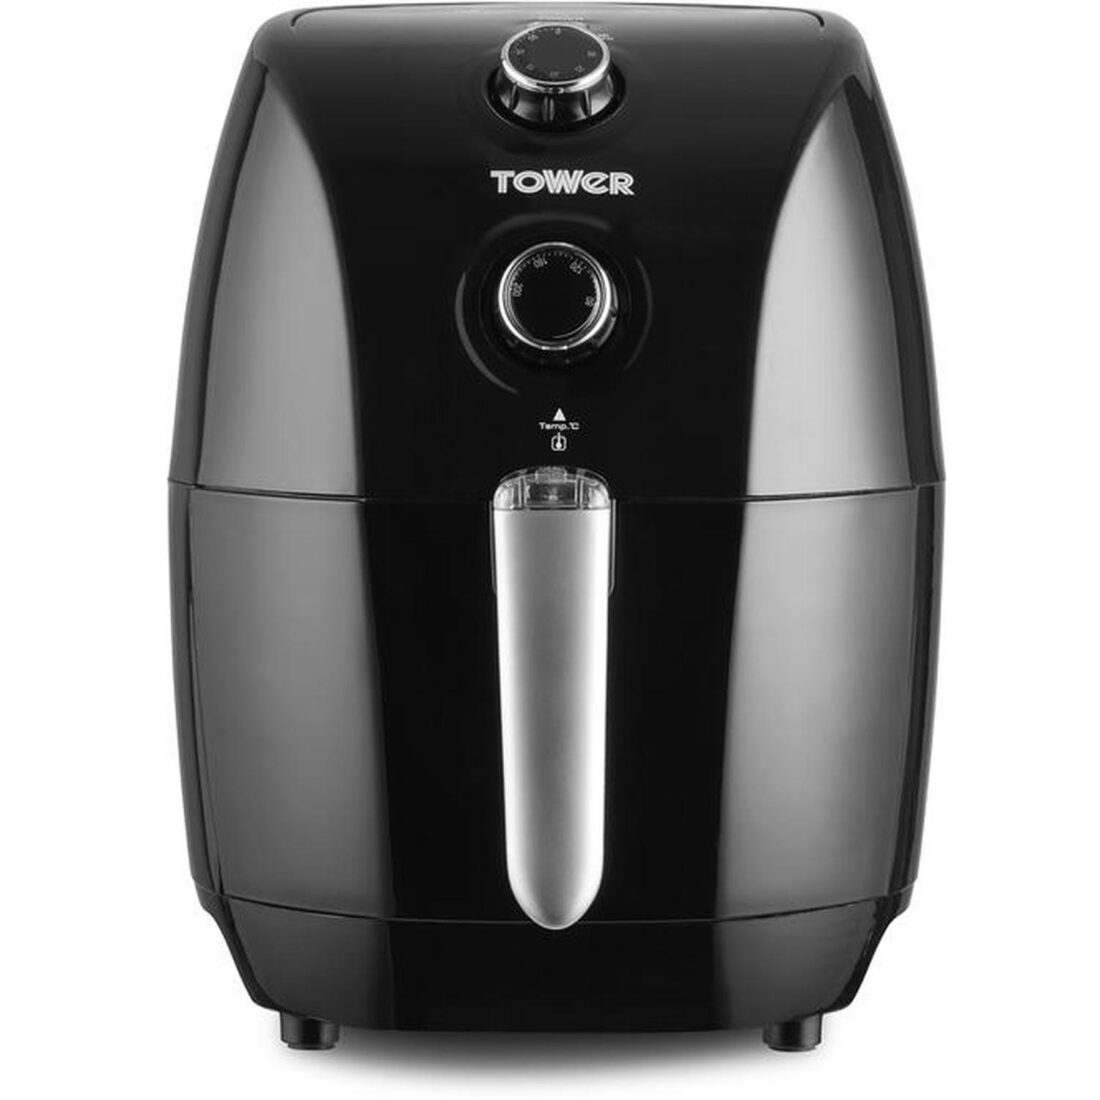 Tower compact air fryer